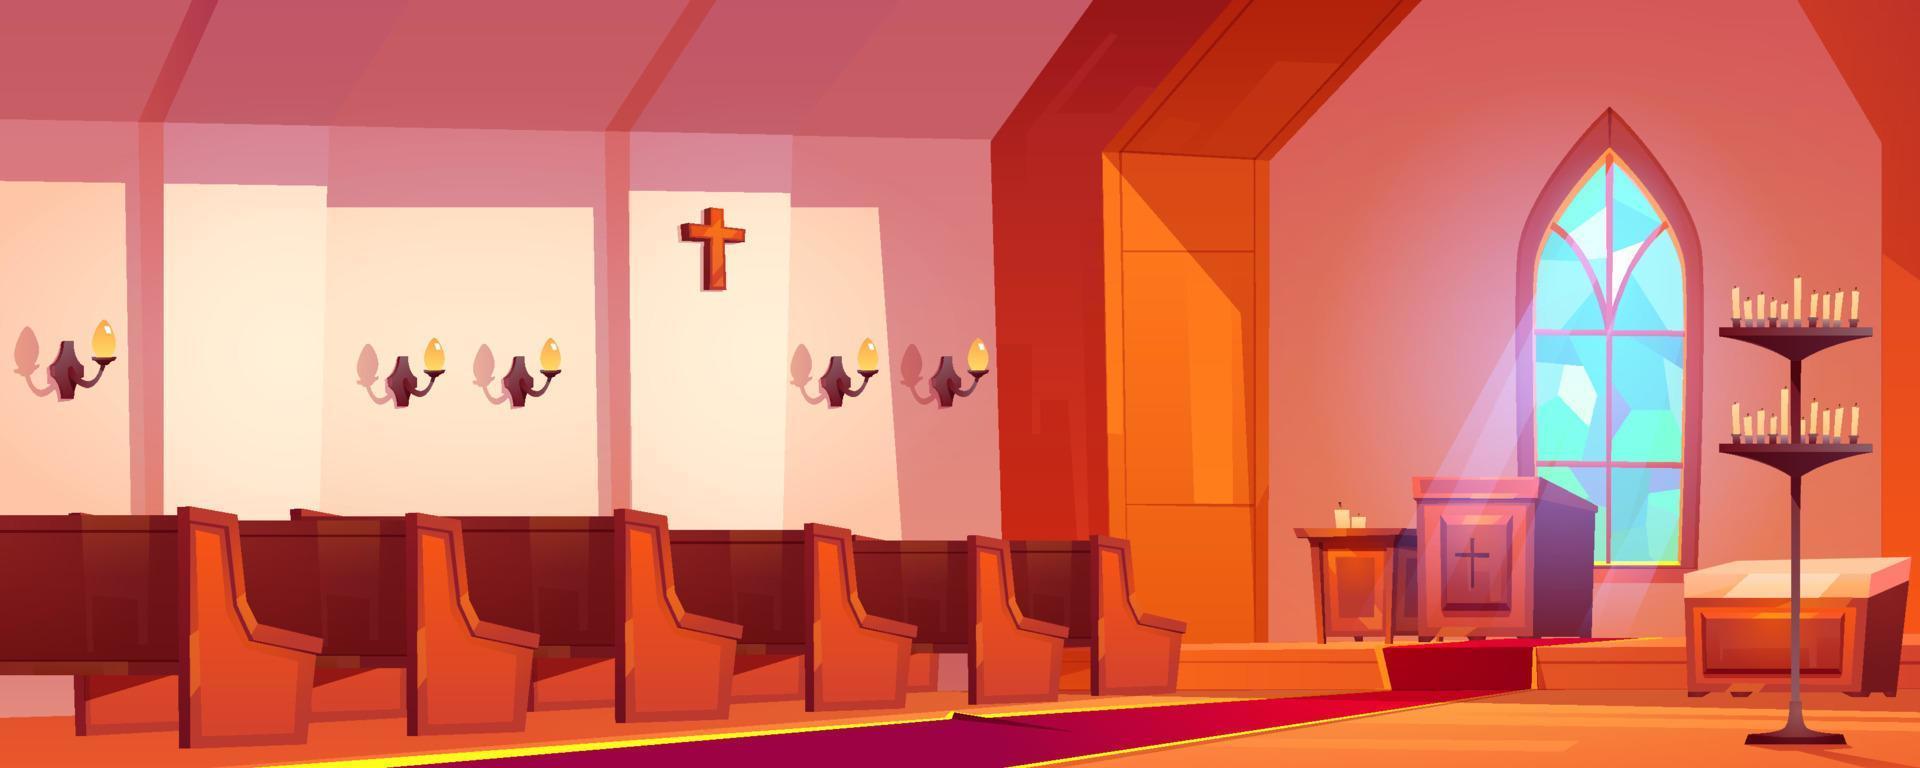 Catholic church interior with altar and benches vector